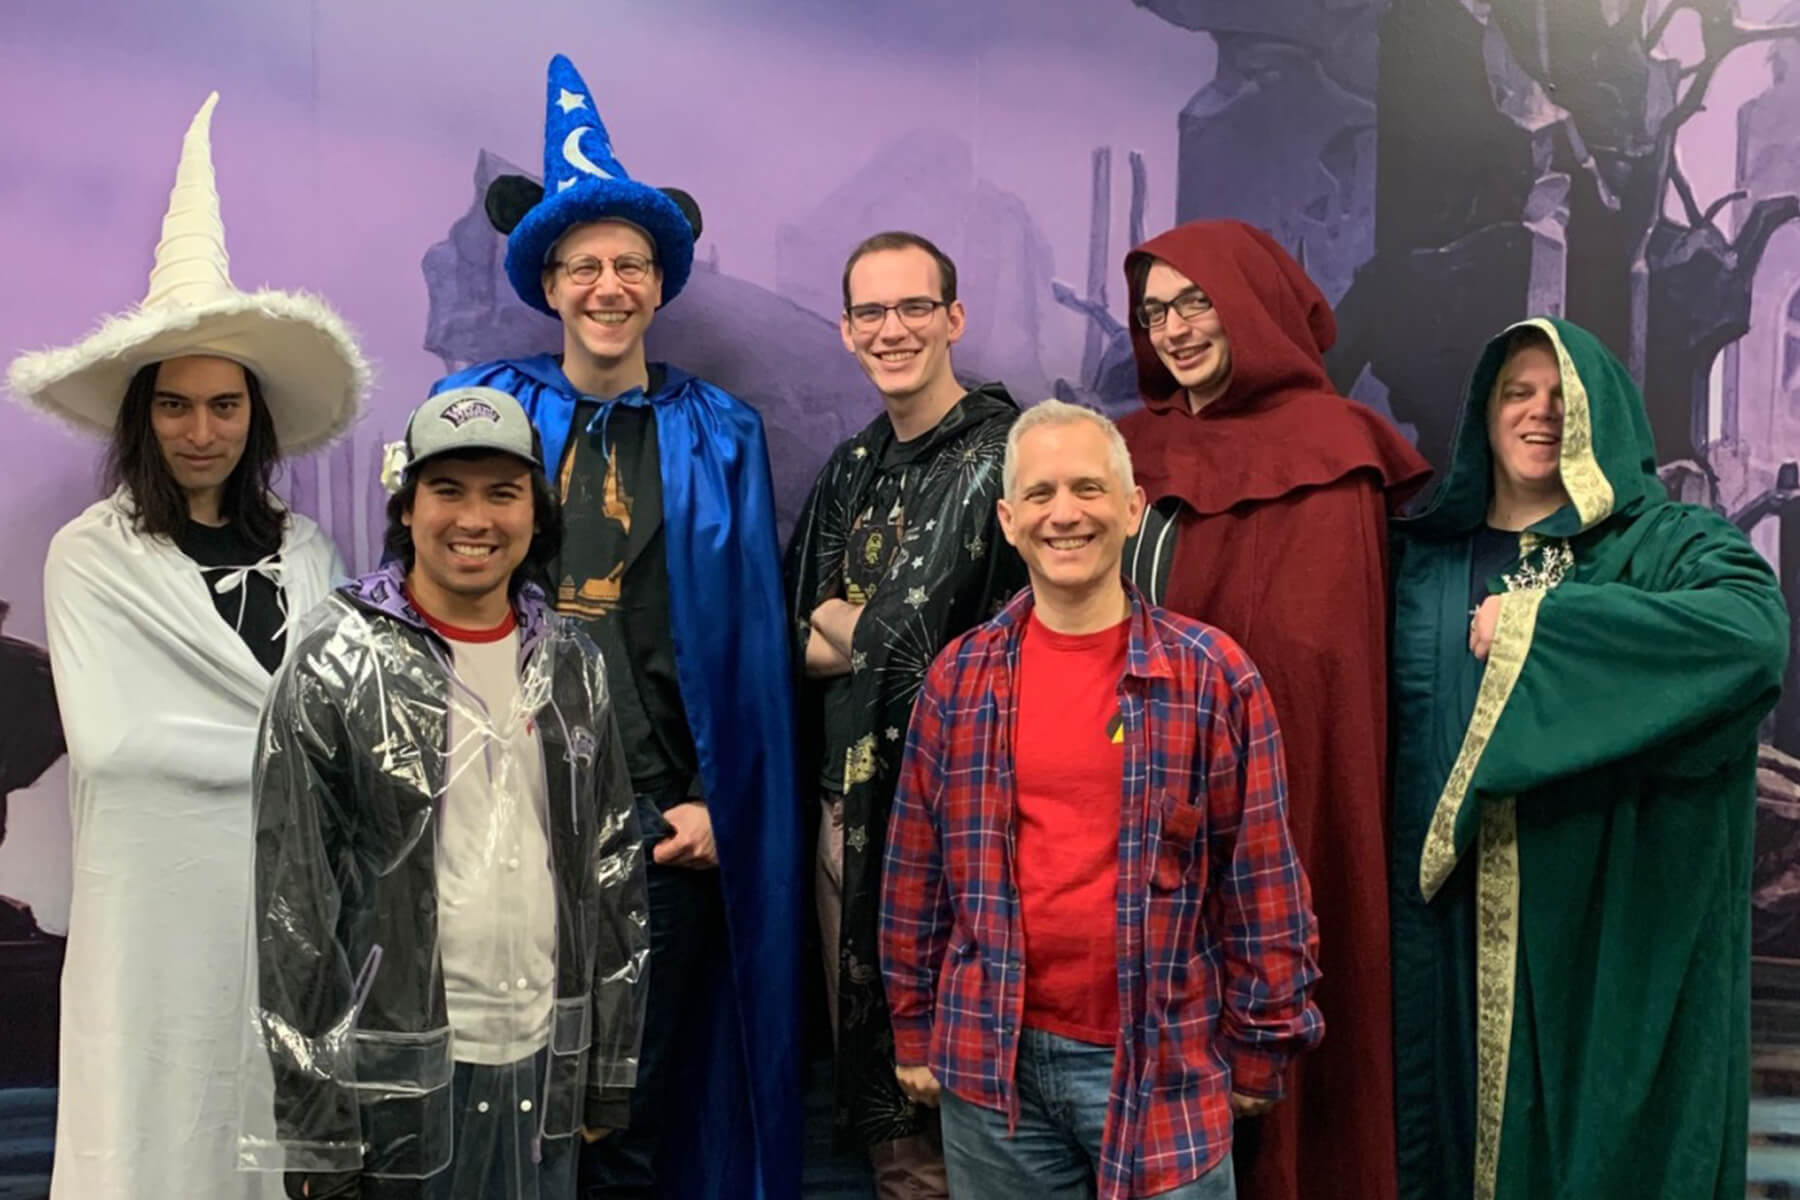 Corey Bowen and fellow Council of Colors members pose wearing variously colored wizard robes.